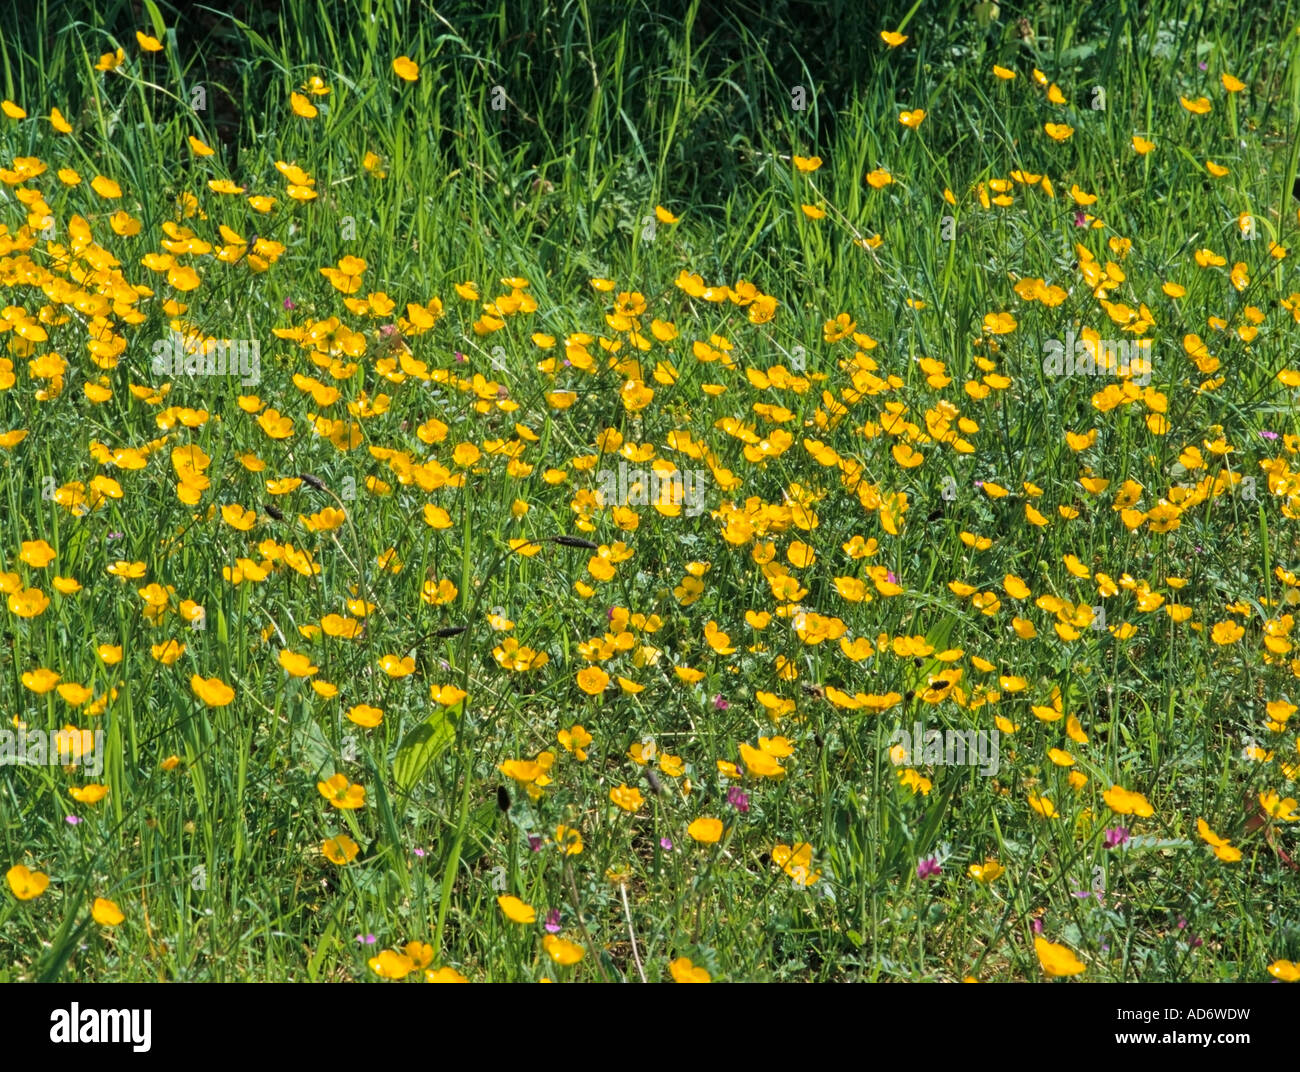 Countryside Wildflowers Buttercup Ranunculus Repens England Great Britain Stock Photo